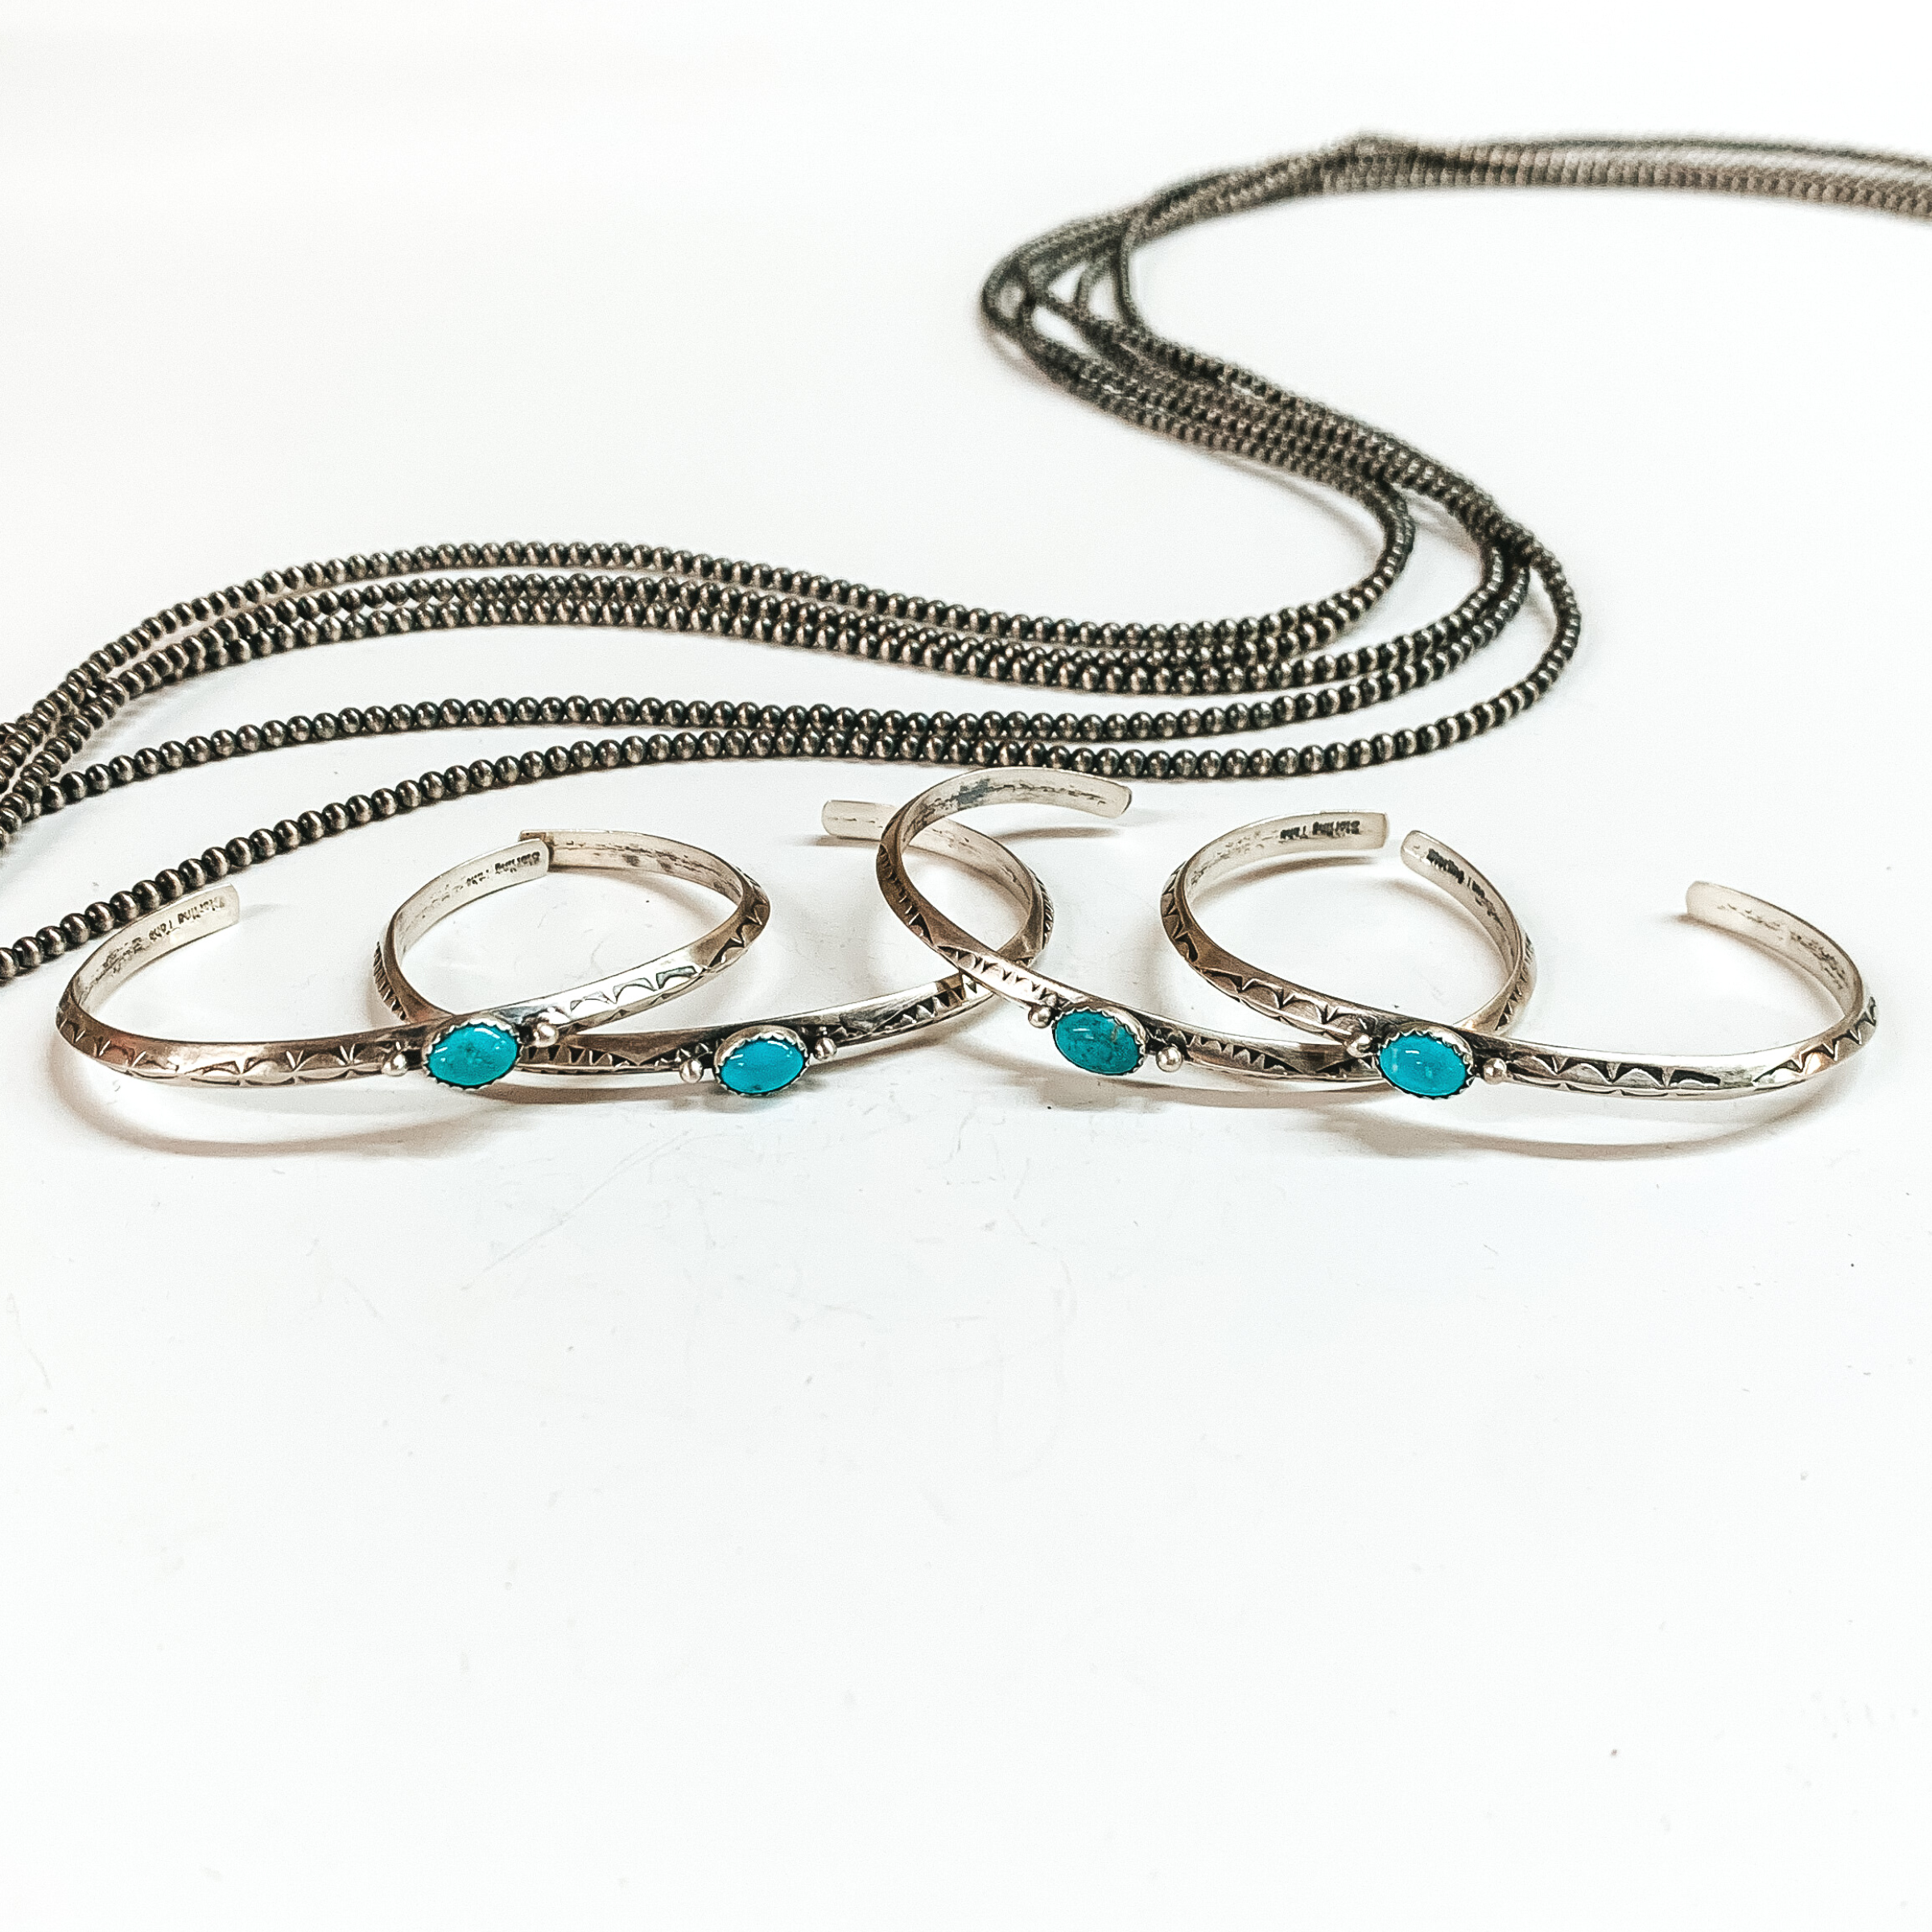 Four silver cuff bracelets that have detailed engraving and center turquoise stone. These bracelets are pictured laying on top of each other on a white background with silver beads behind them. 